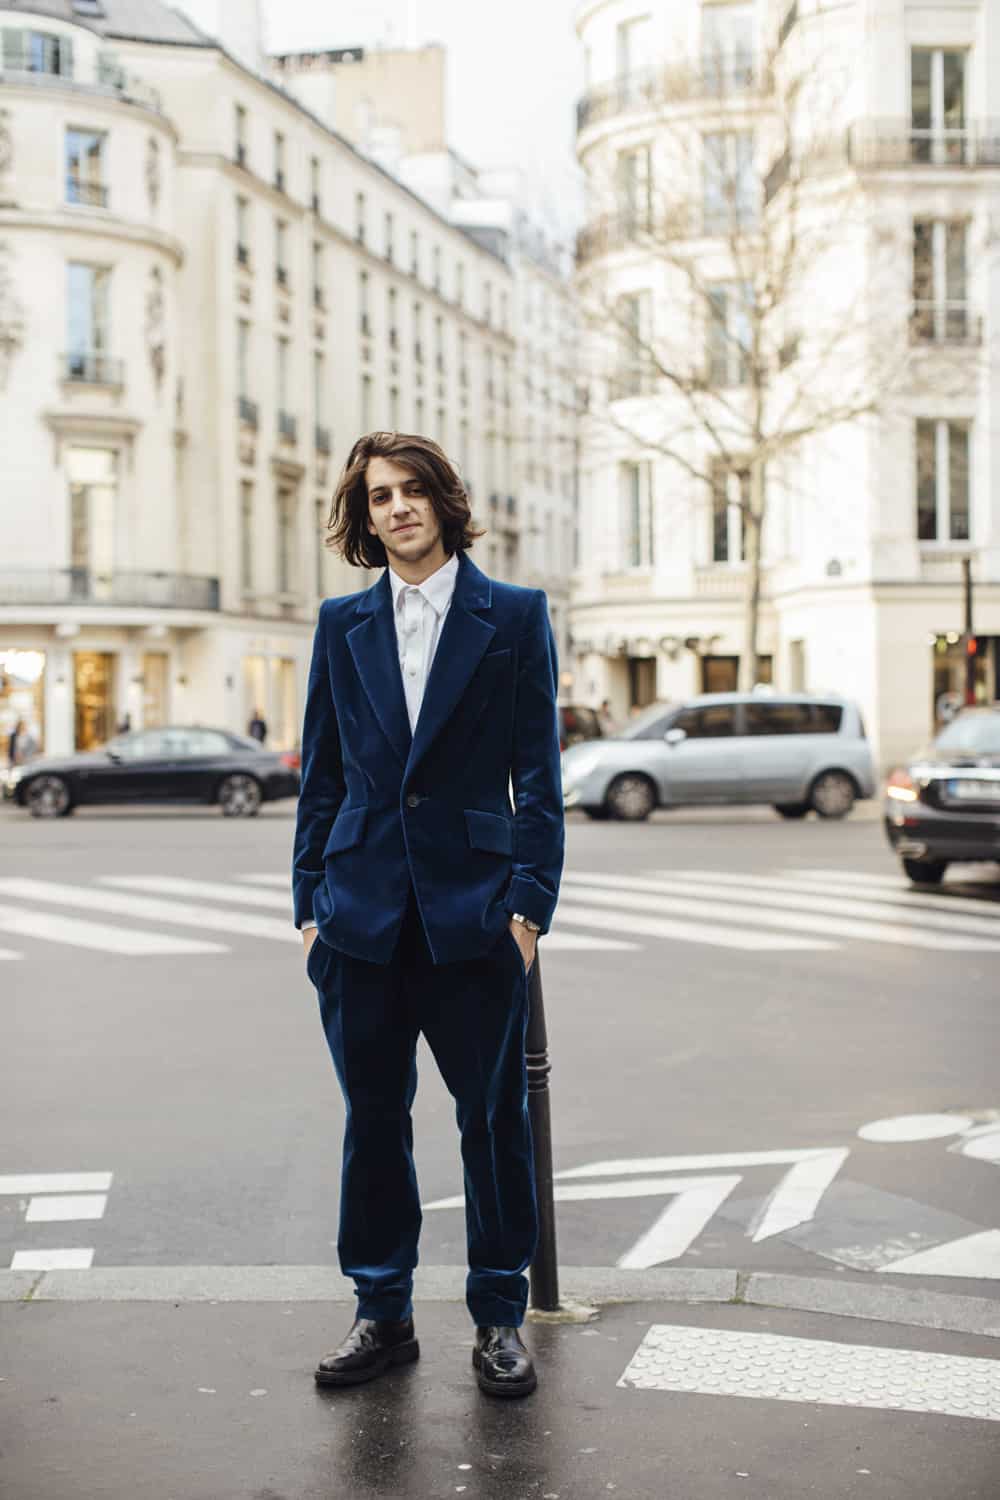 The Best Street Style Looks From Days 5 and 6 of Paris Fashion Week